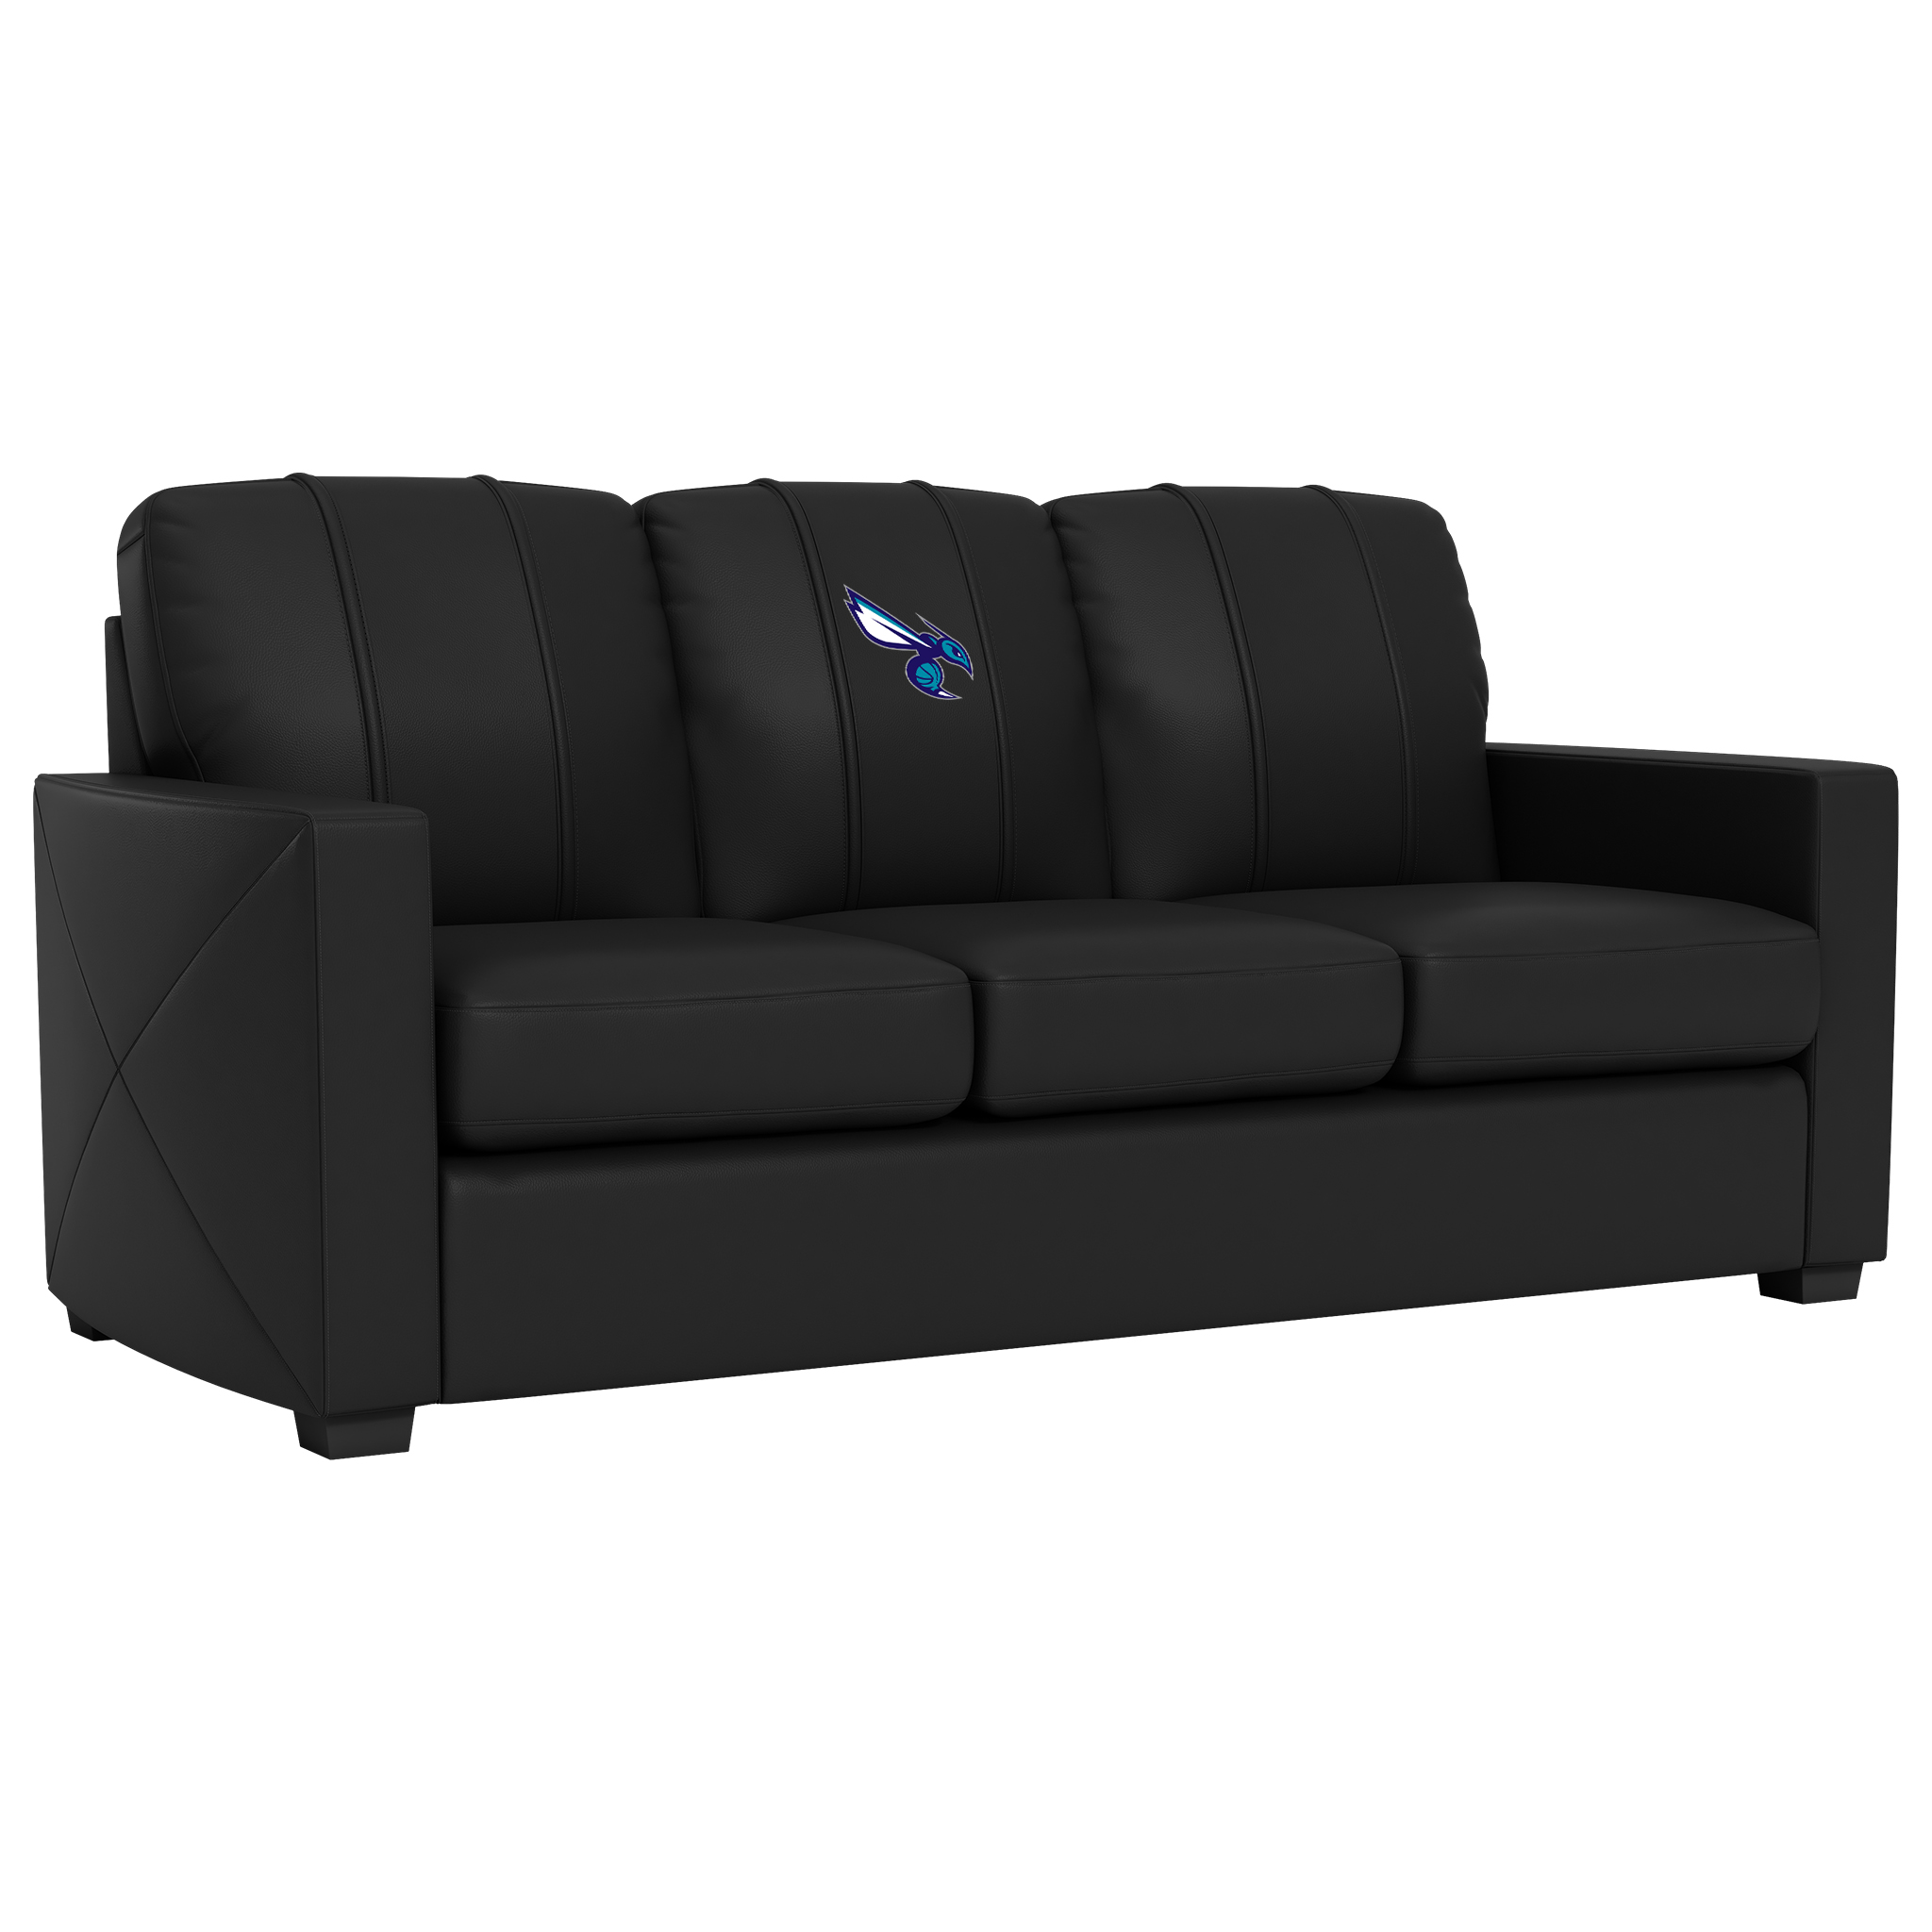 Charlotte Hornets Silver Sofa with Charlotte Hornets Secondary